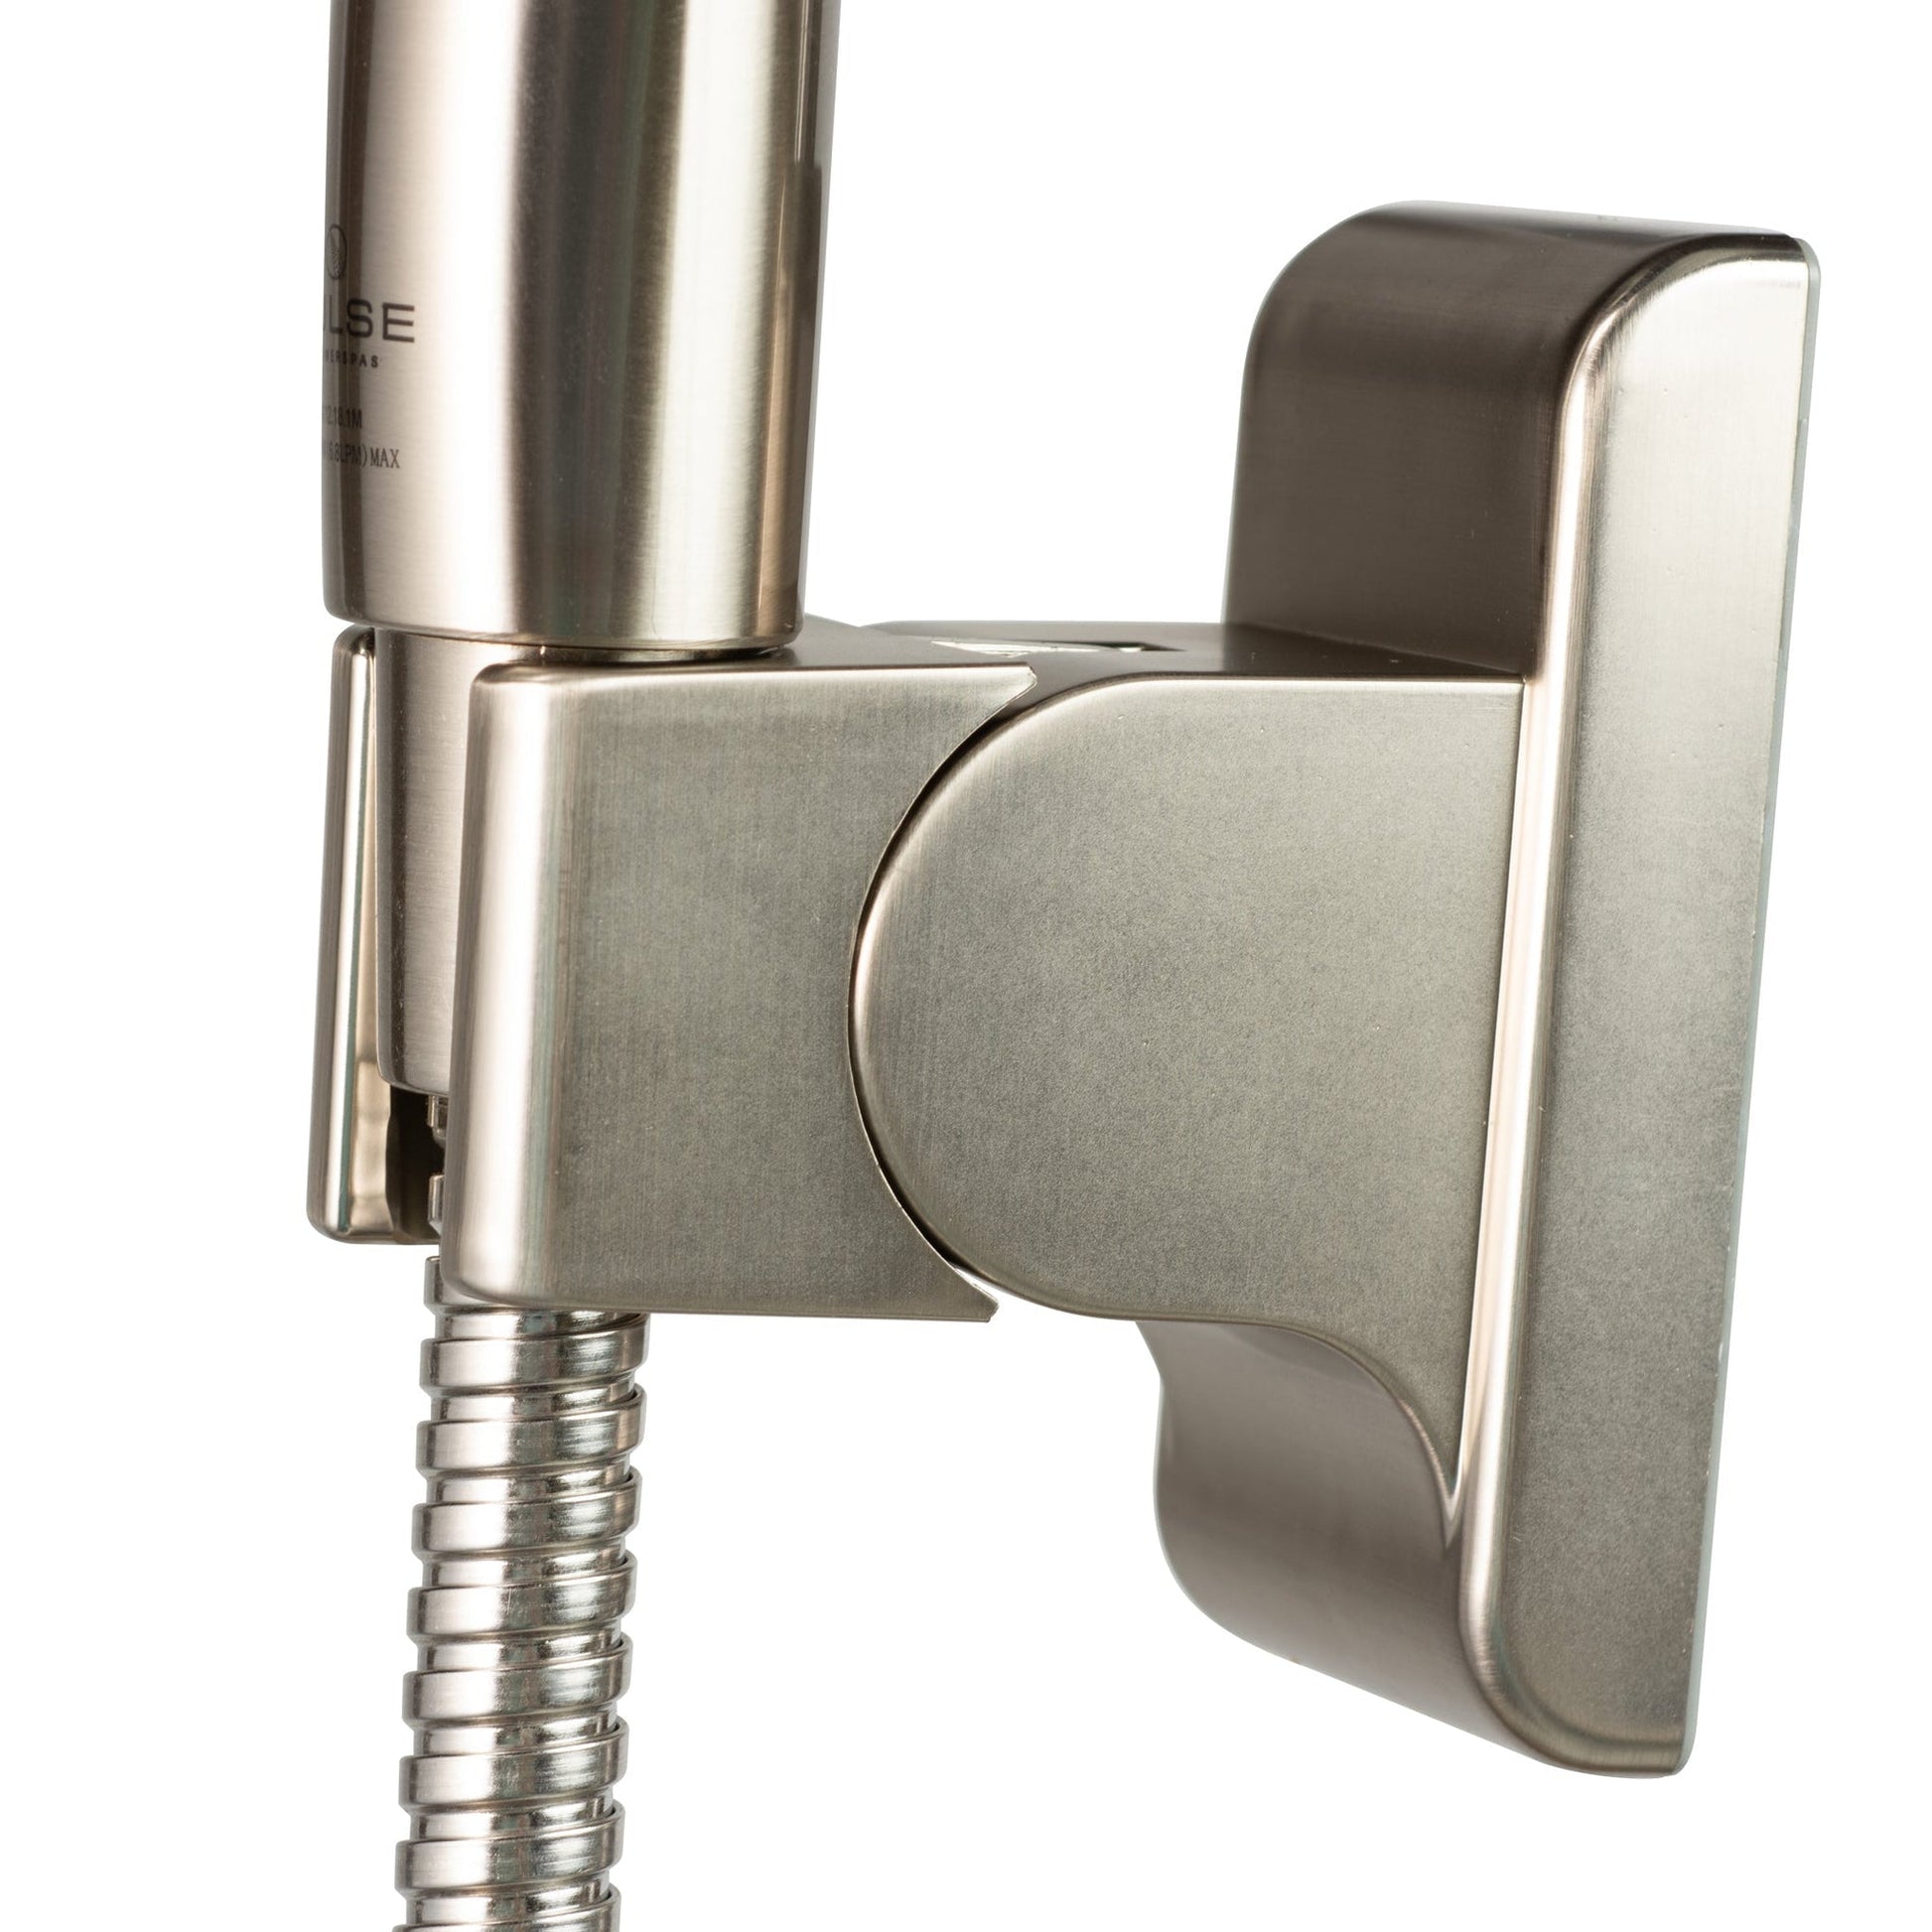 PULSE ShowerSpas Oasis Multi Function Shower System 1.8 GPM in Brushed Nickel Finish With Hand Shower